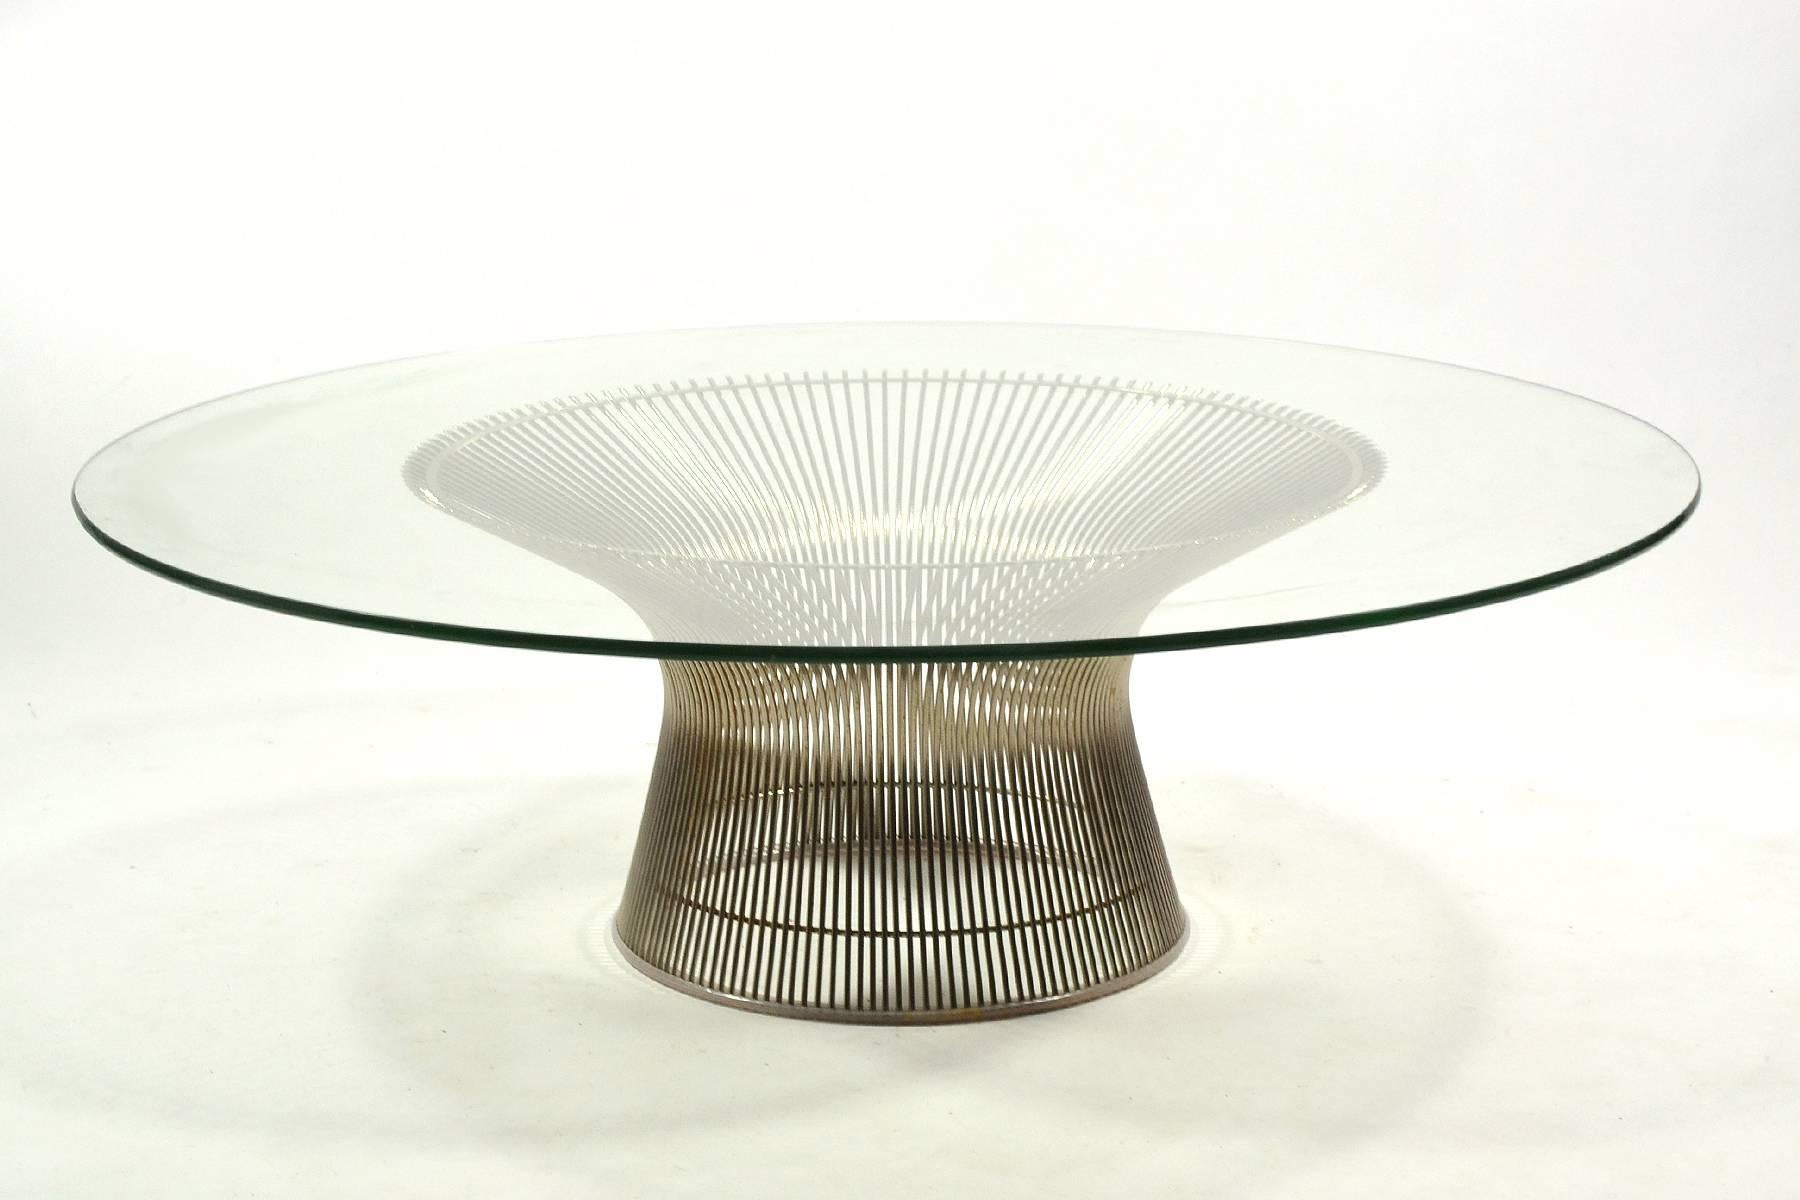 An exceptional amount of hand work is required to fabricate the Platner coffee table with its many wires and electronic welds. The form recalls a sheaf of wheat and the layers of wire rods create beautiful moiré patterns. This vintage example has